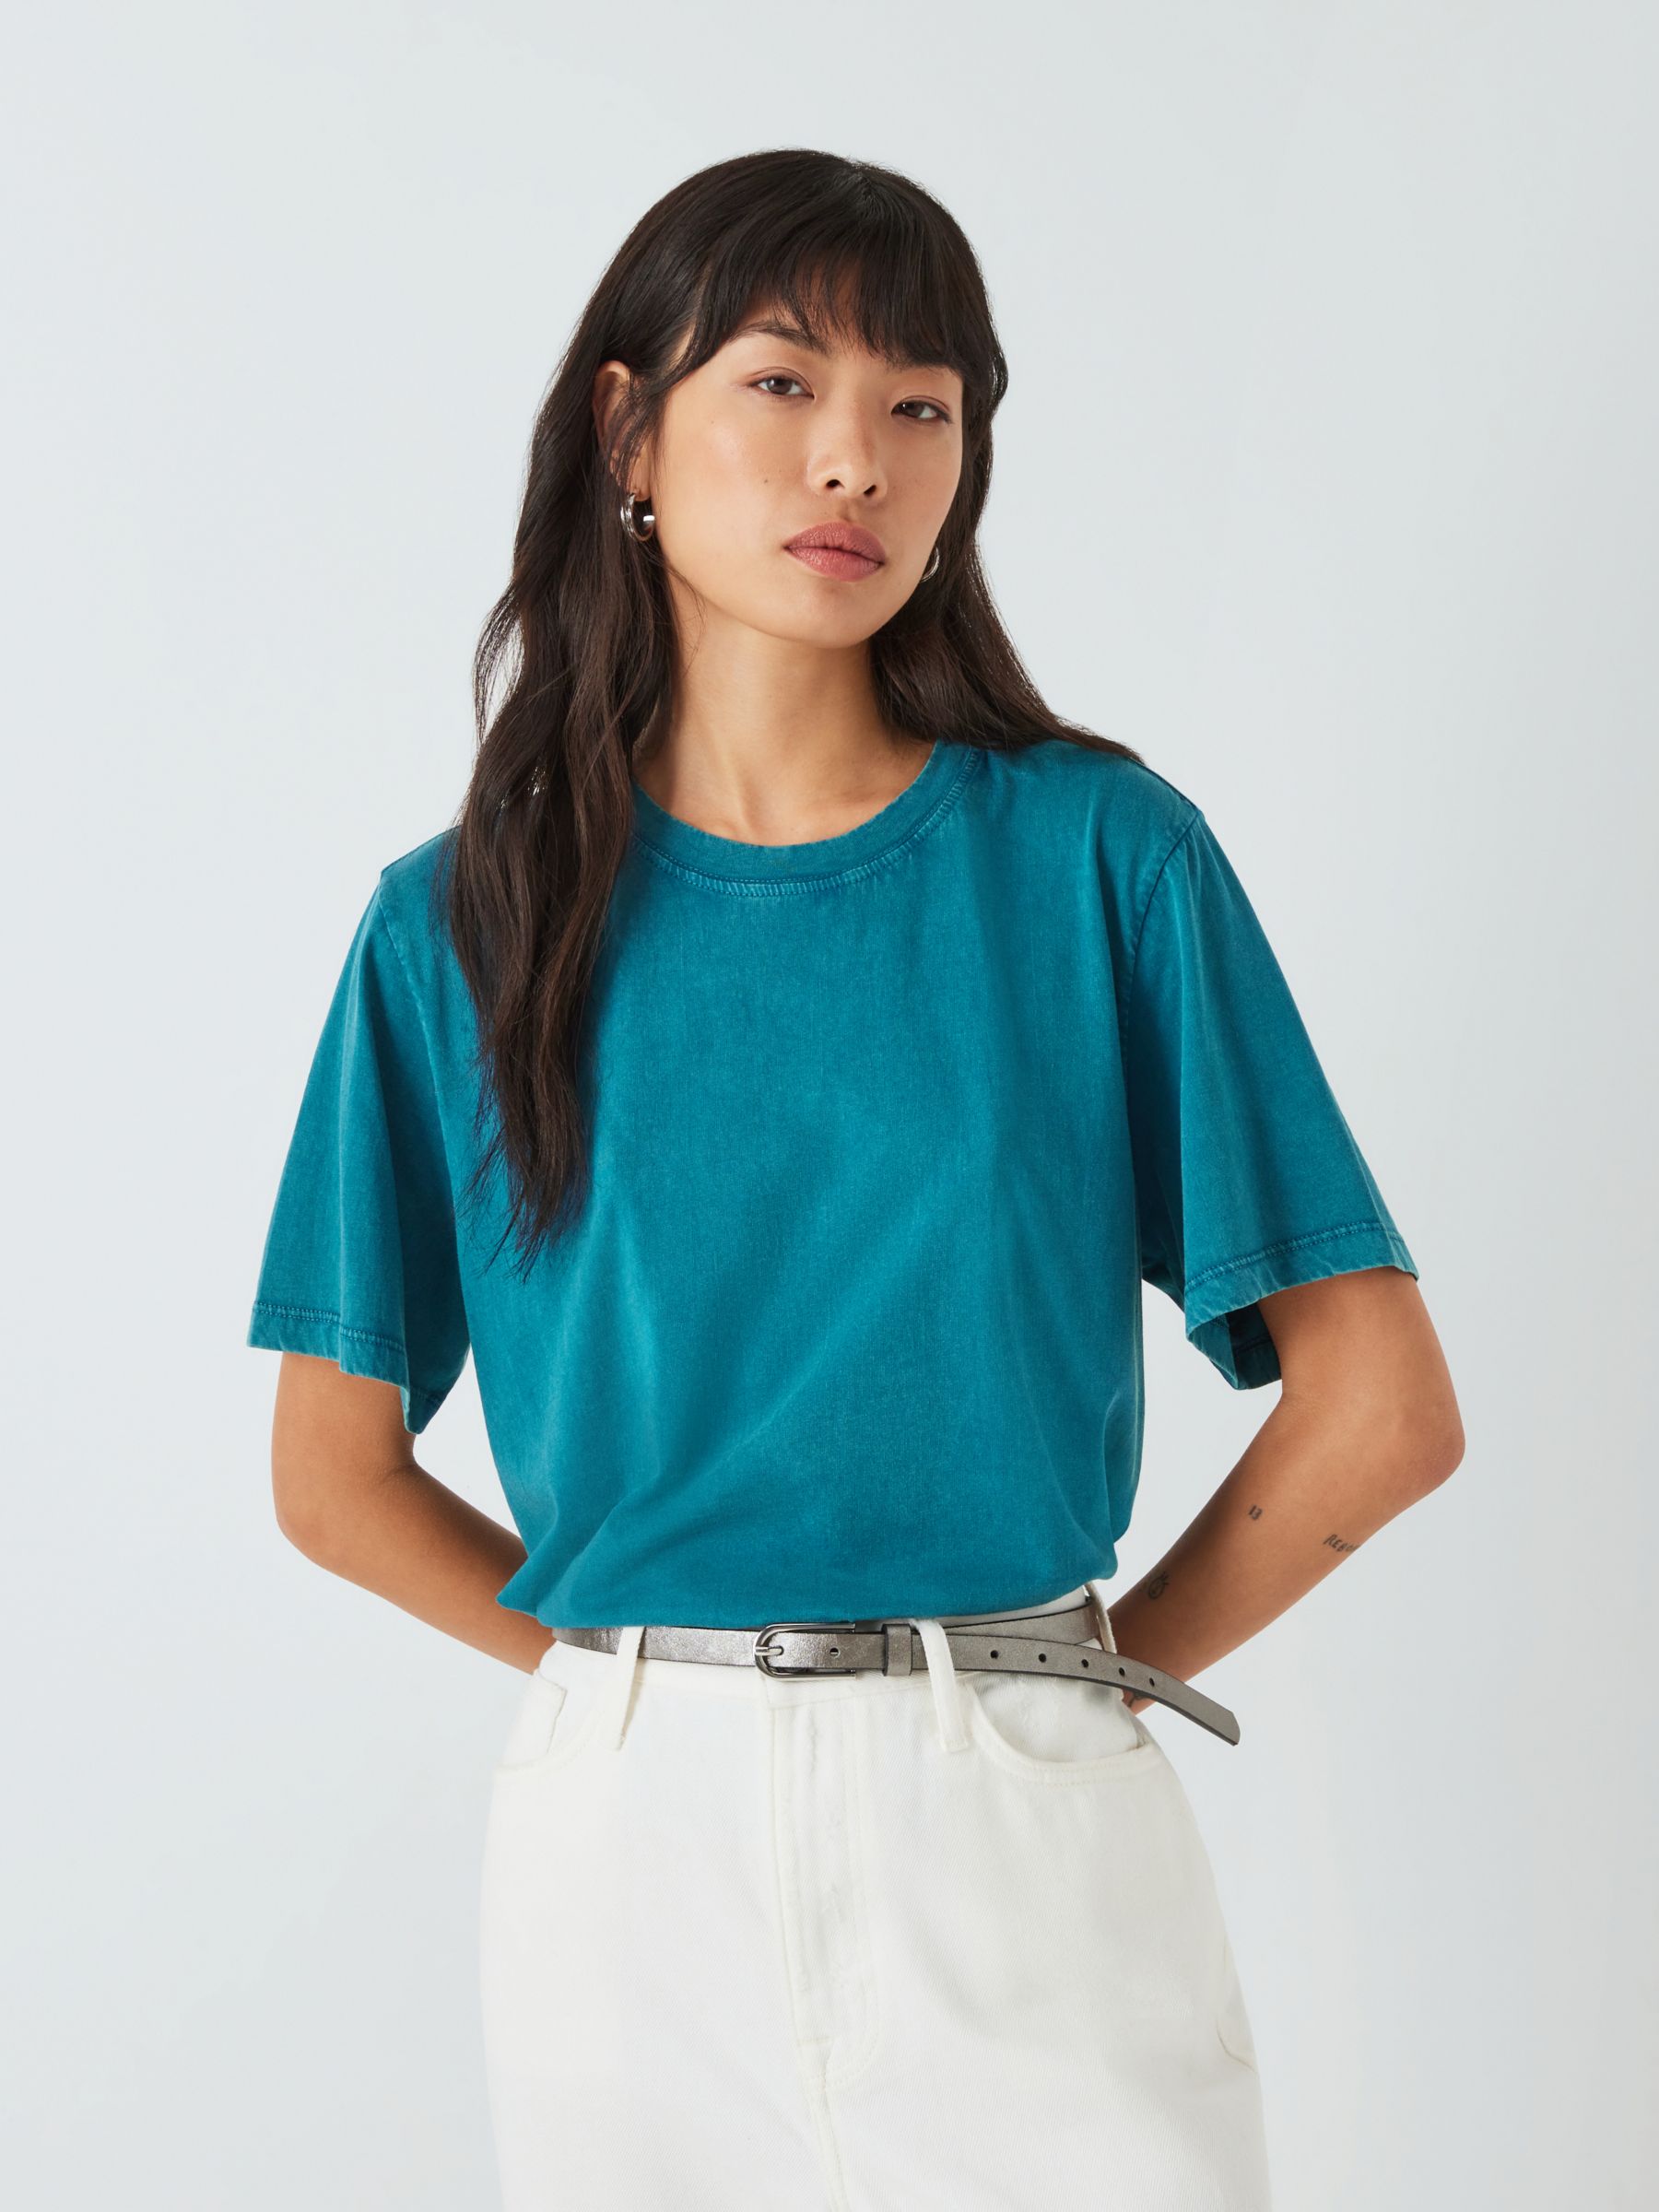 AND/OR Authentic Plain Short Sleeve T-Shirt, Teal at John Lewis & Partners